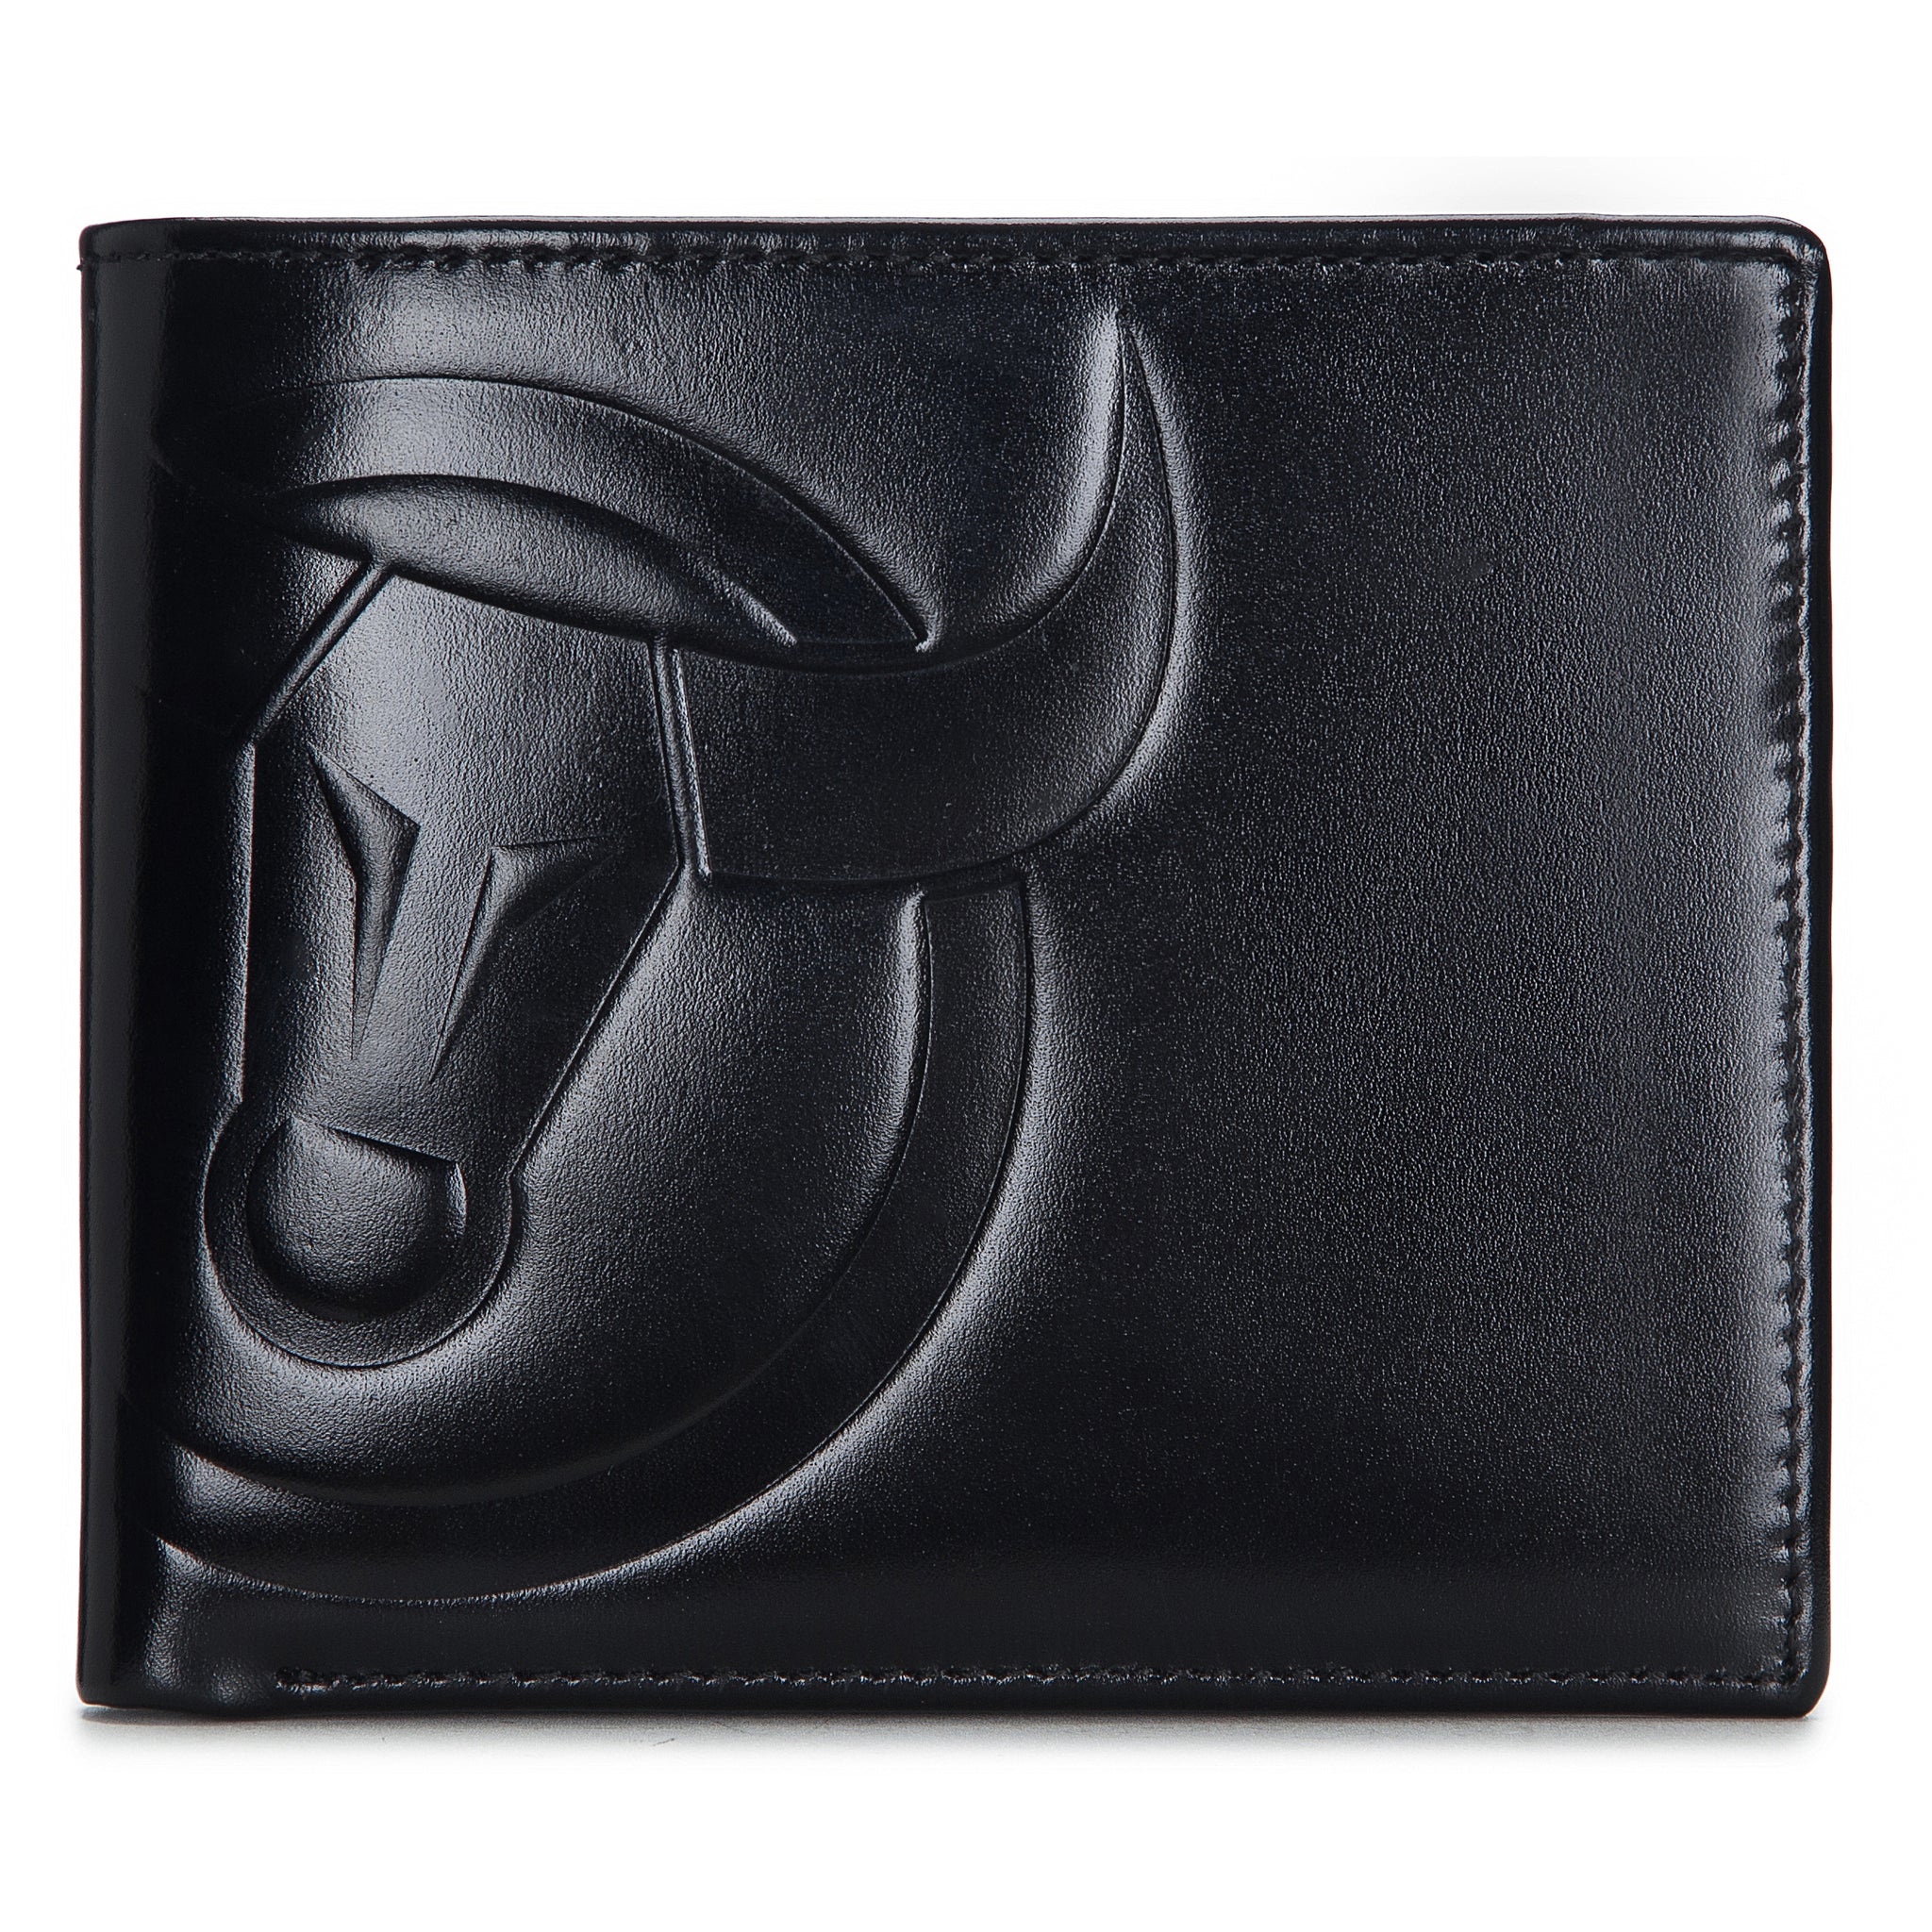 Men's Genuine Leather Wallet High Quality RFID Wallet Coin Purse